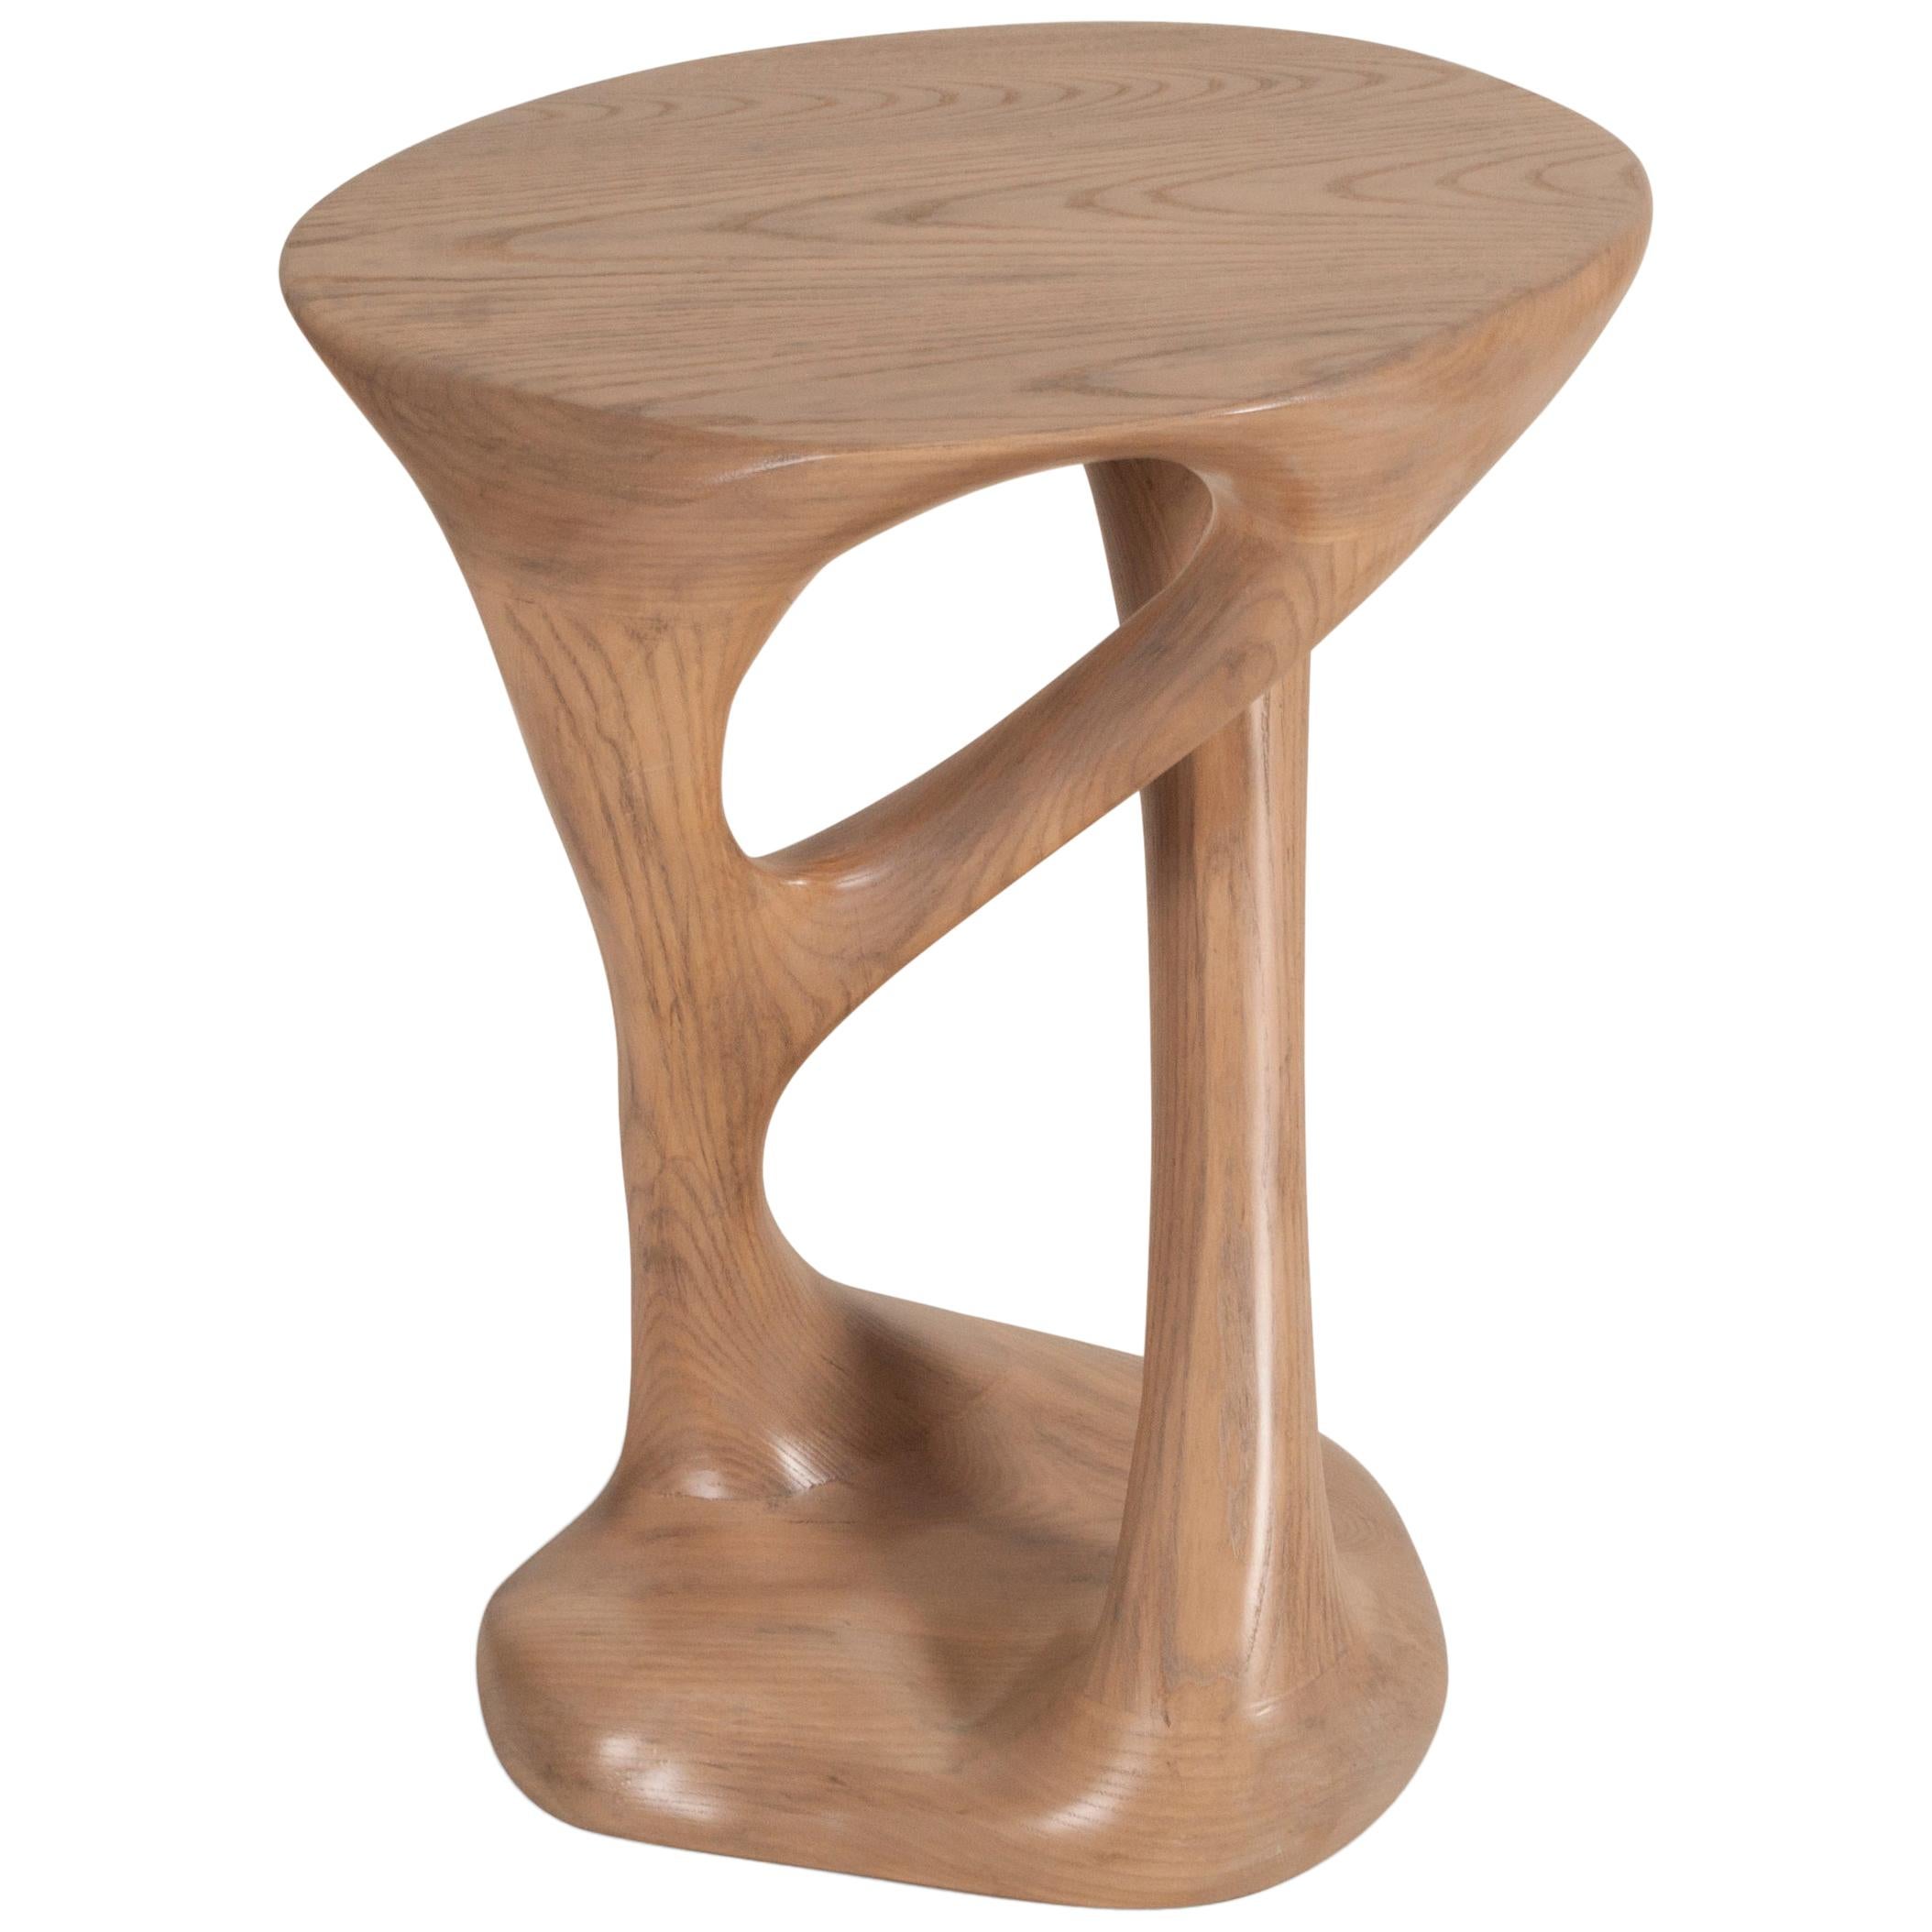 Sasha Side Table in Antique Oak stain on Ash wood  For Sale